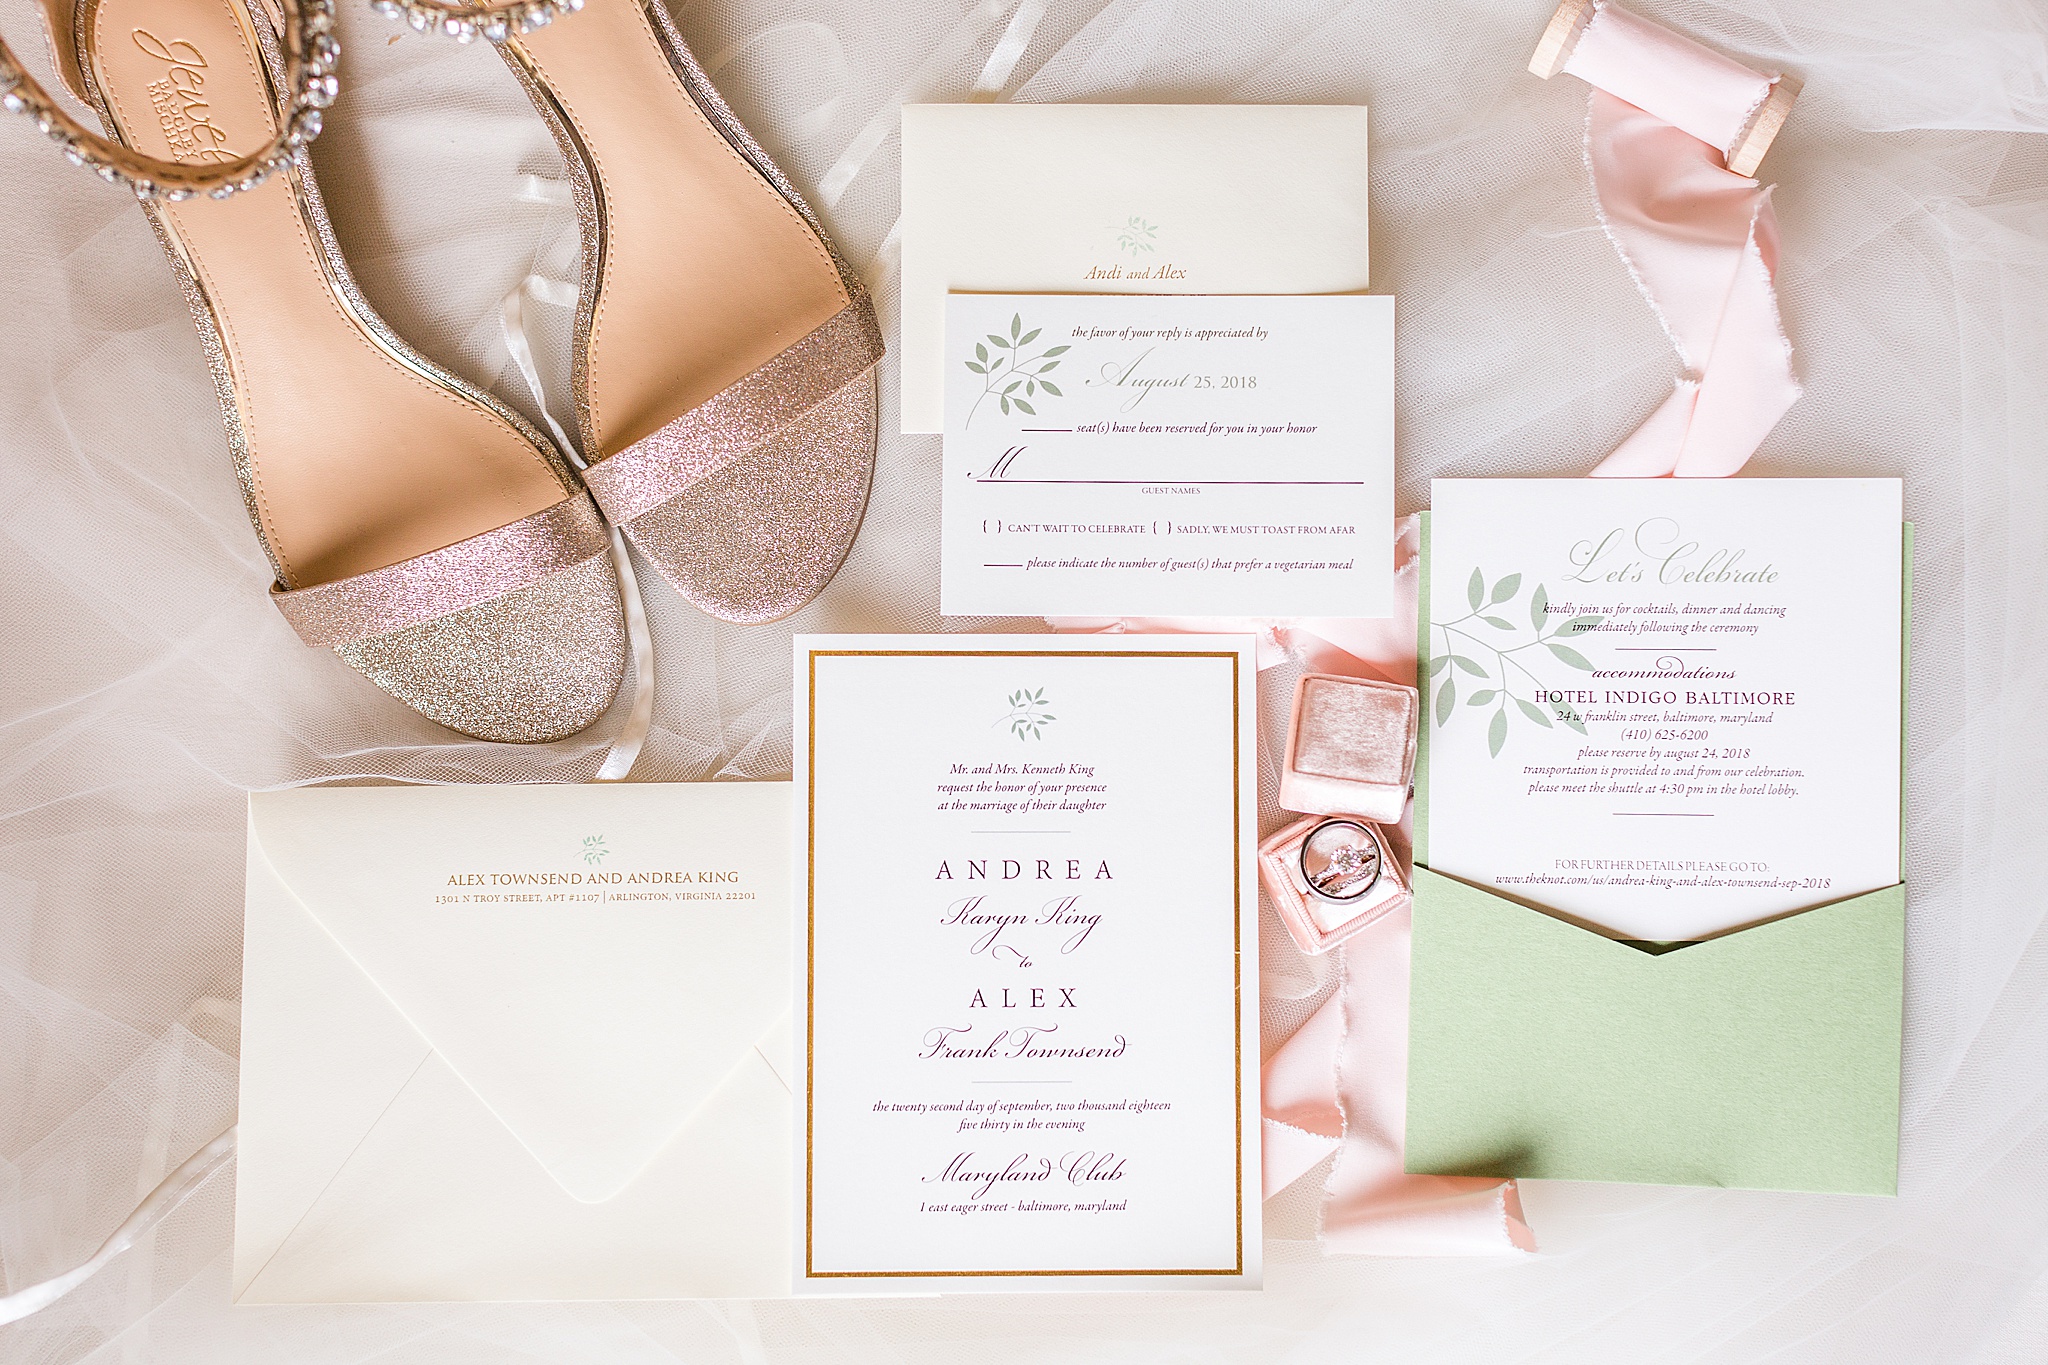 wedding invitations by Cincinnati by Design photographed by Alexandra Mandato Photography